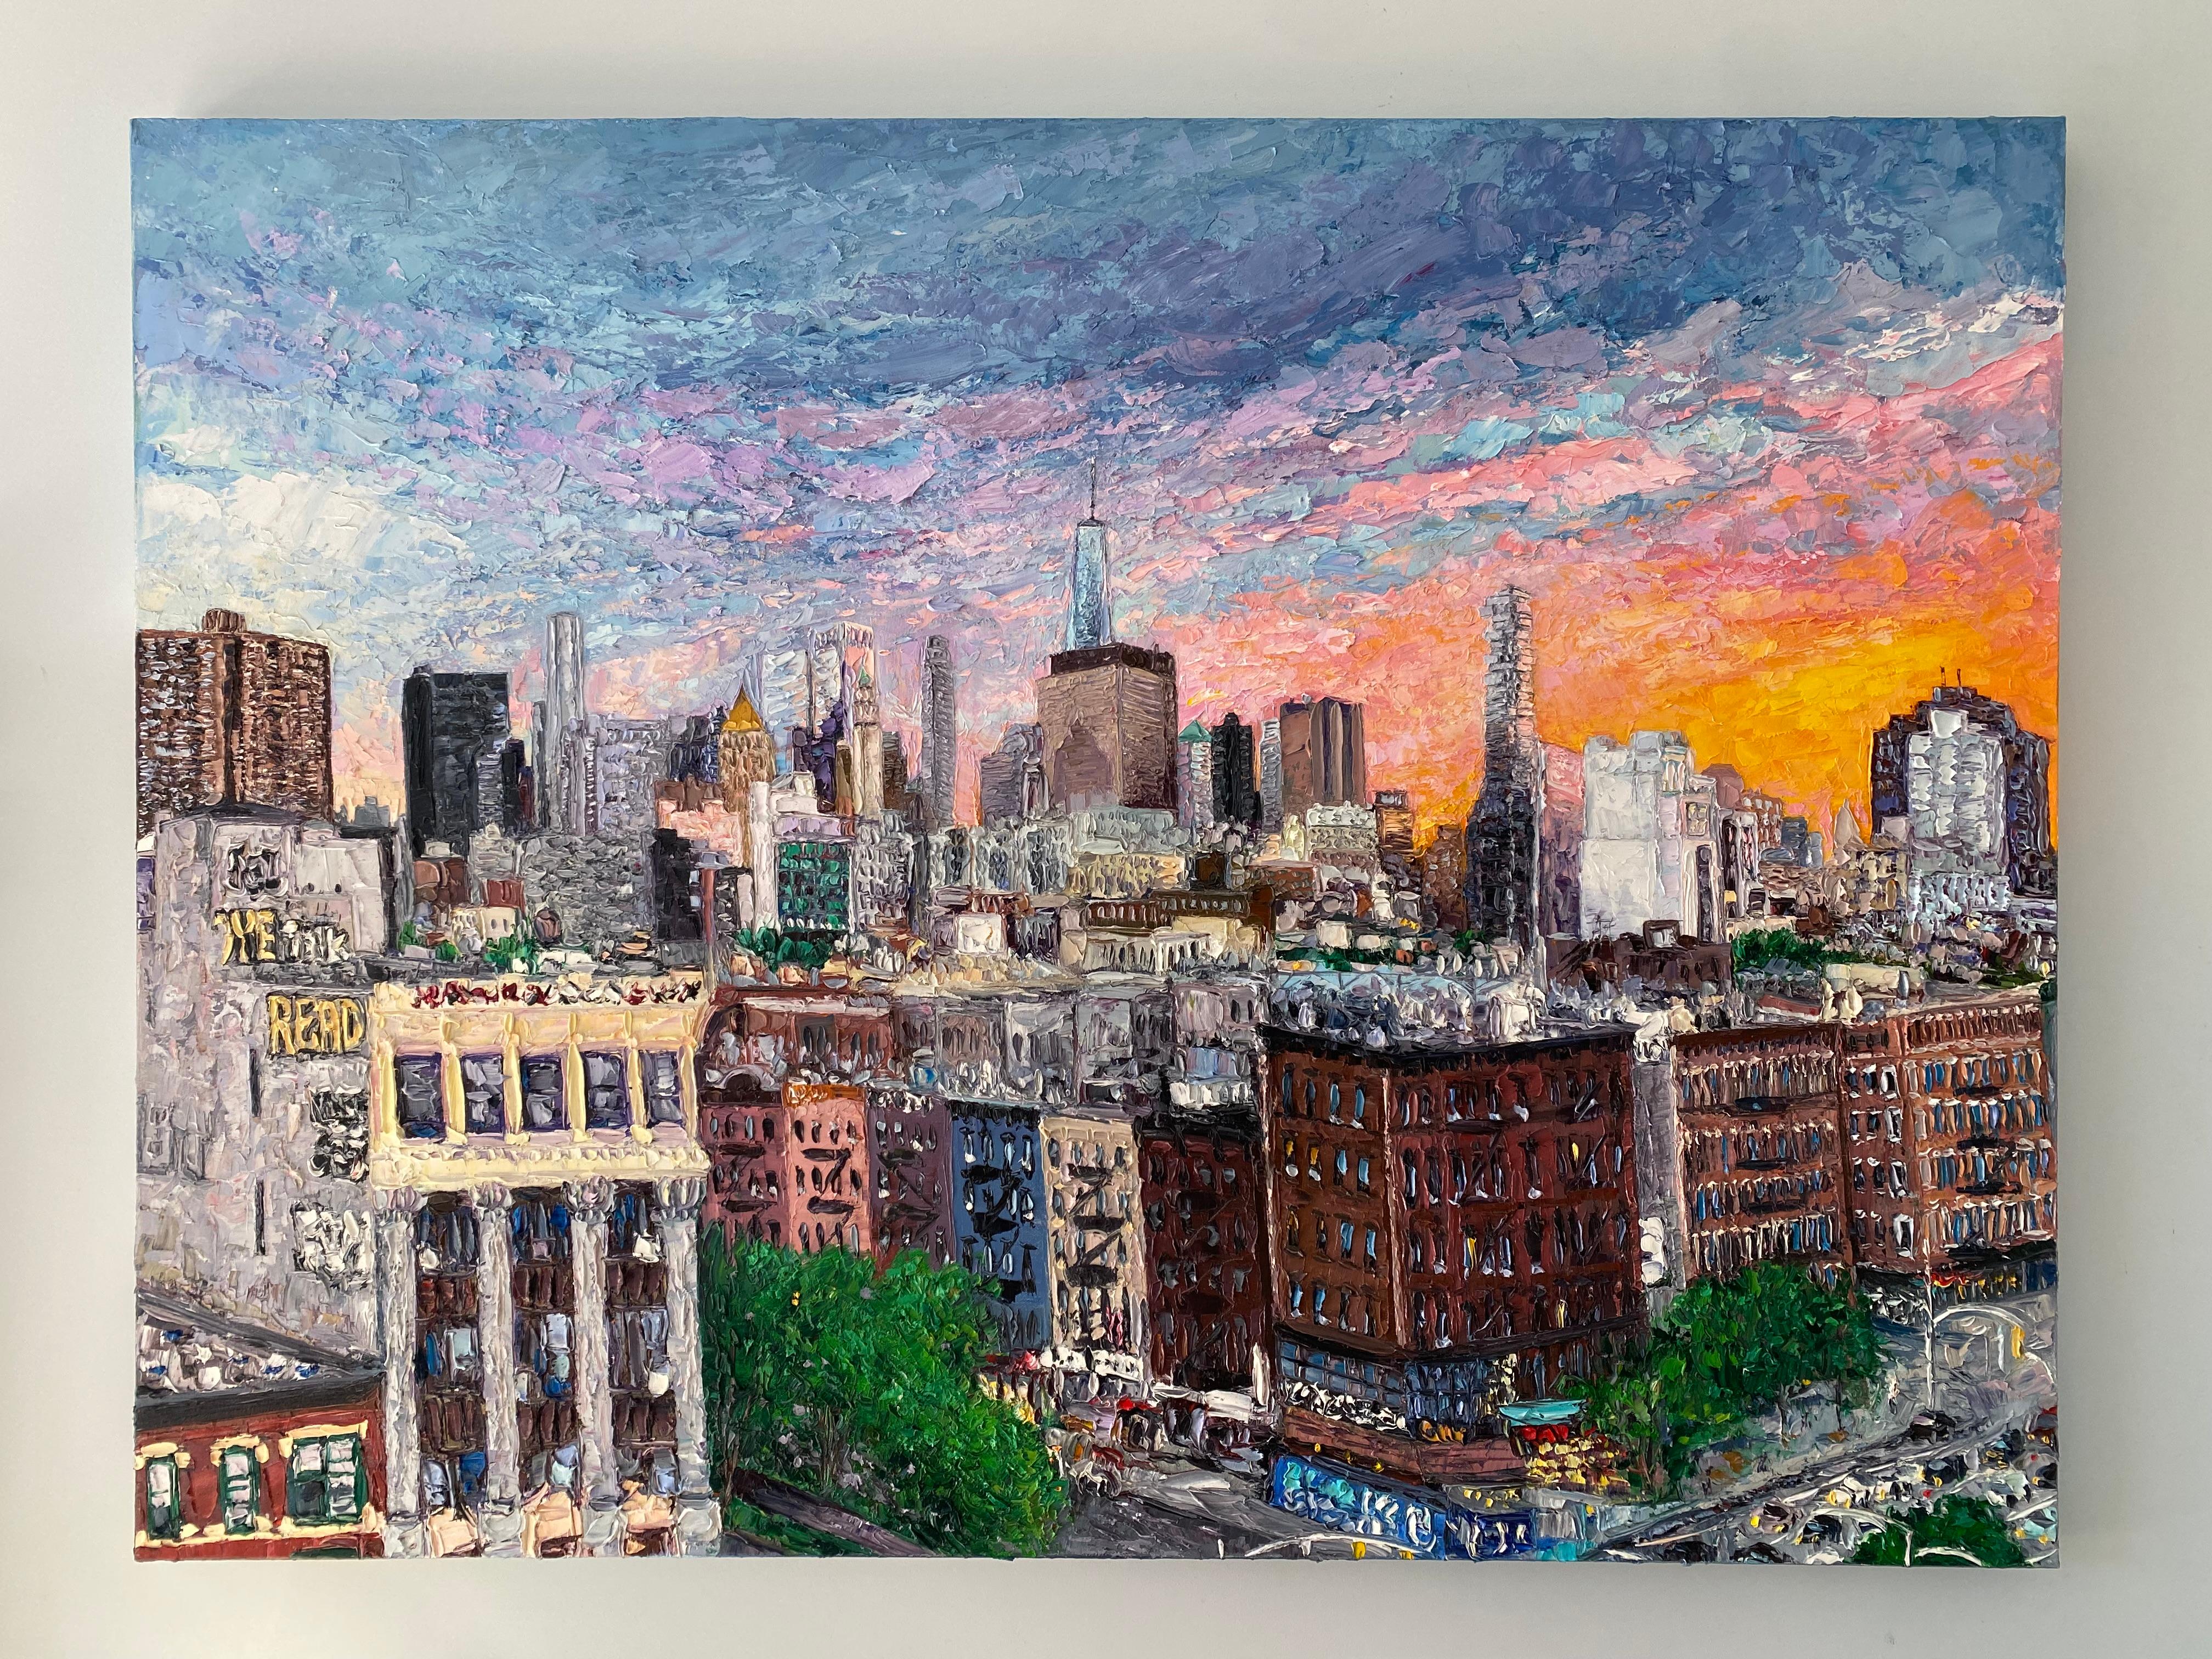 Sunset on Empire City, Original Impressionist Painting
Original urban landscape painting​
48 x 36 x 1.5 inches 
Oil on canvas 
Original artwork signed by the artist
Artwork is unframed 

Sunset view of the Manhattan Skyline including One World and